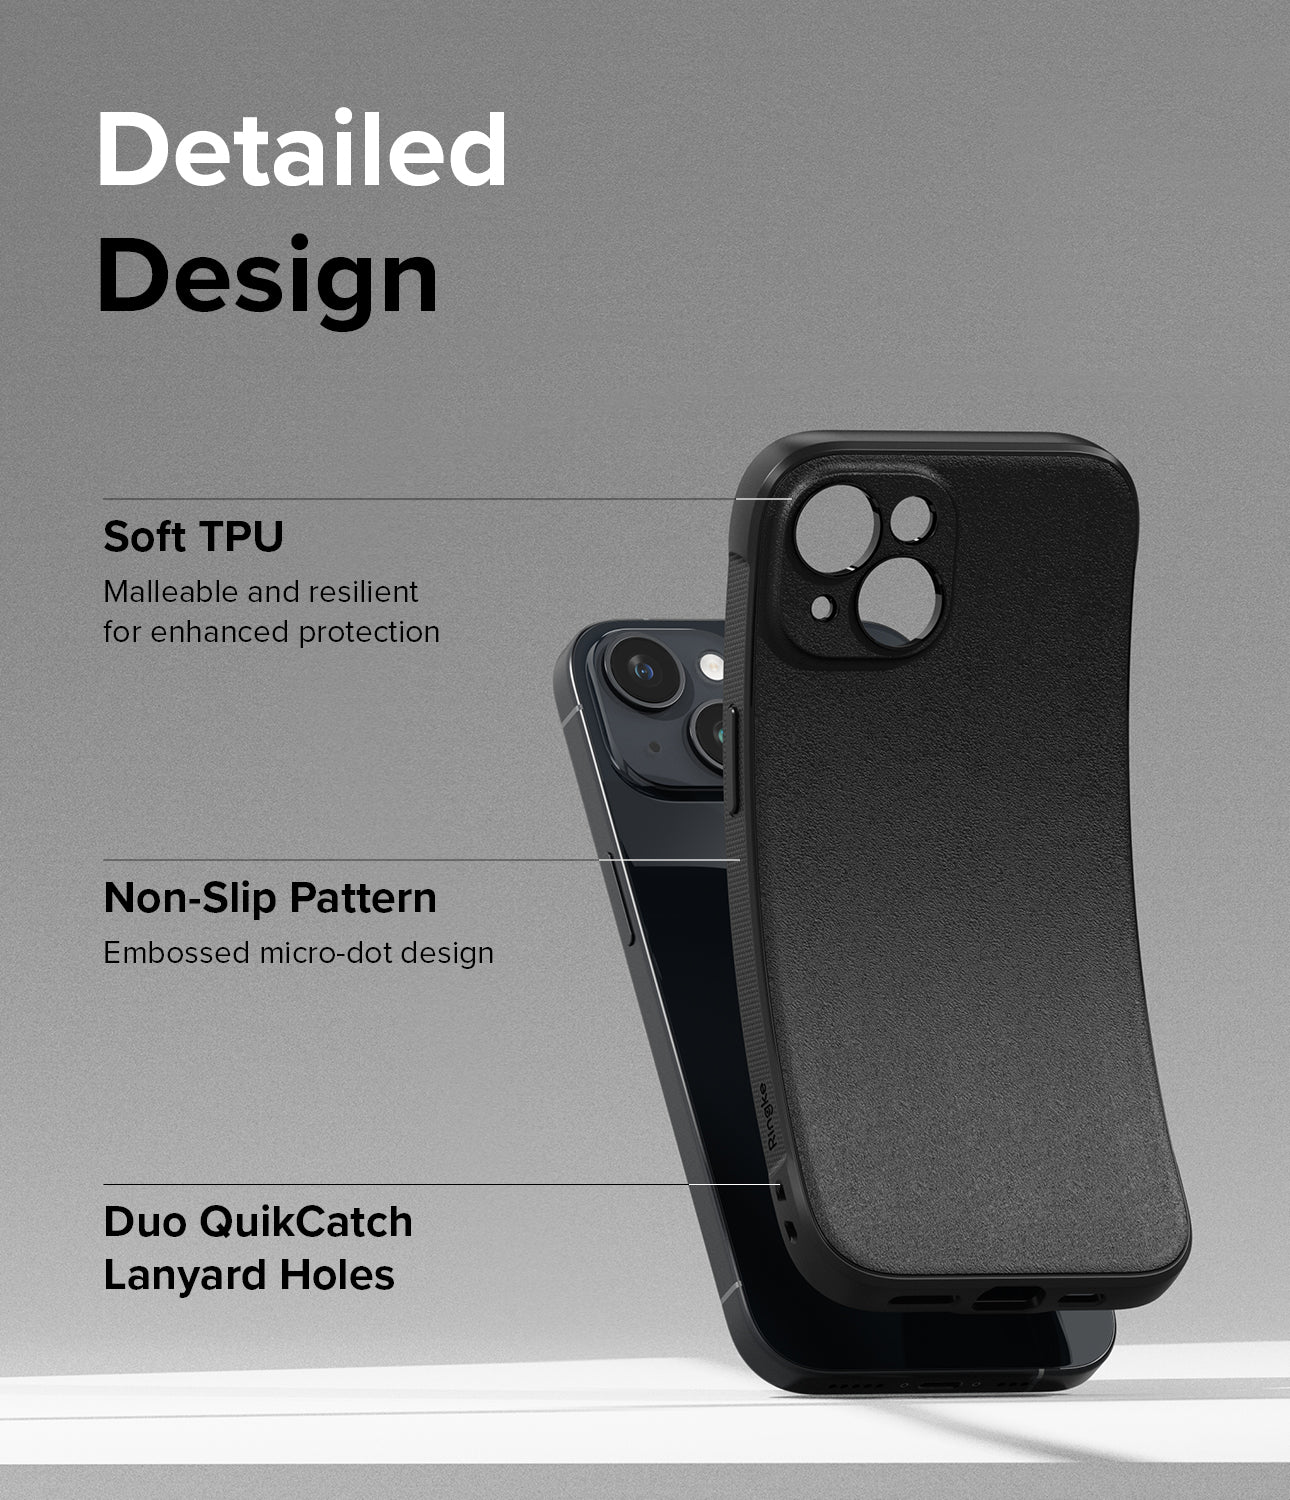 iPhone 15 Case | Onyx - Black - Detailed Design. Soft TPU. Malleable and resilient for enhanced protection. Non-Slip Pattern. Embossed micro-dot design. Duo QuikCatch Lanyard Holes.